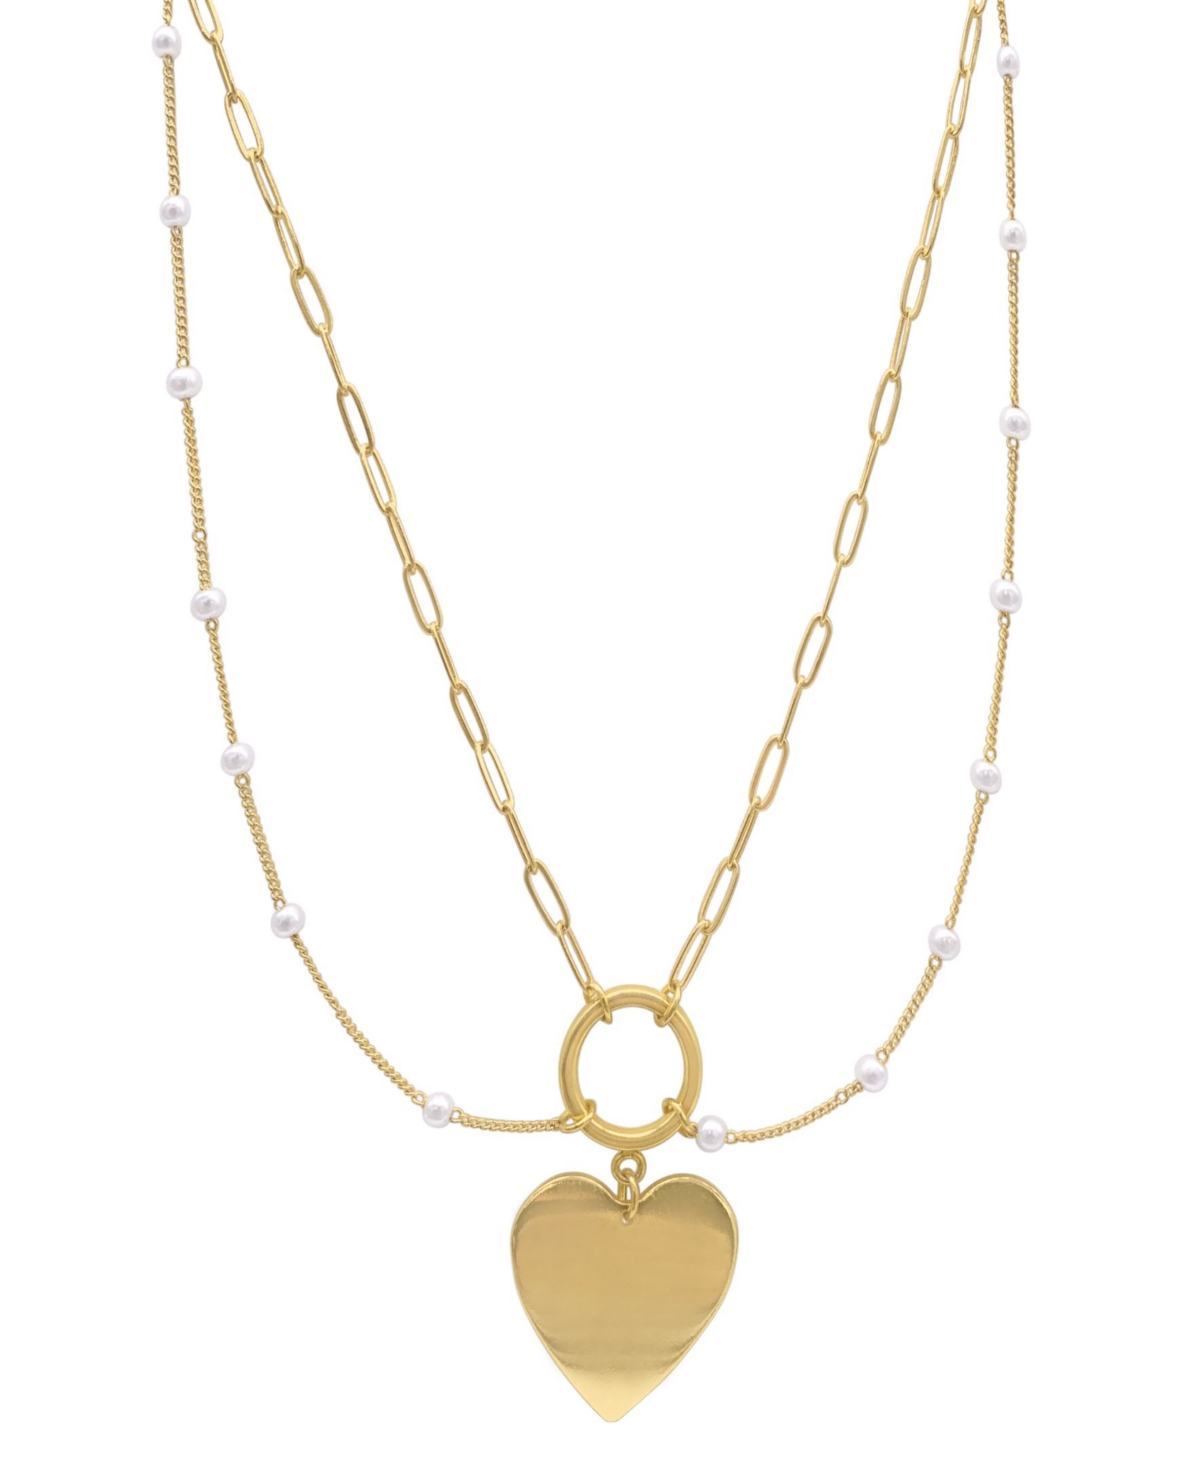 14k Gold-Plated Paperclip Chain & Mother-of-Pearl Draping Heart Pendant Statement Necklace, 18" + 3" extender - Gold